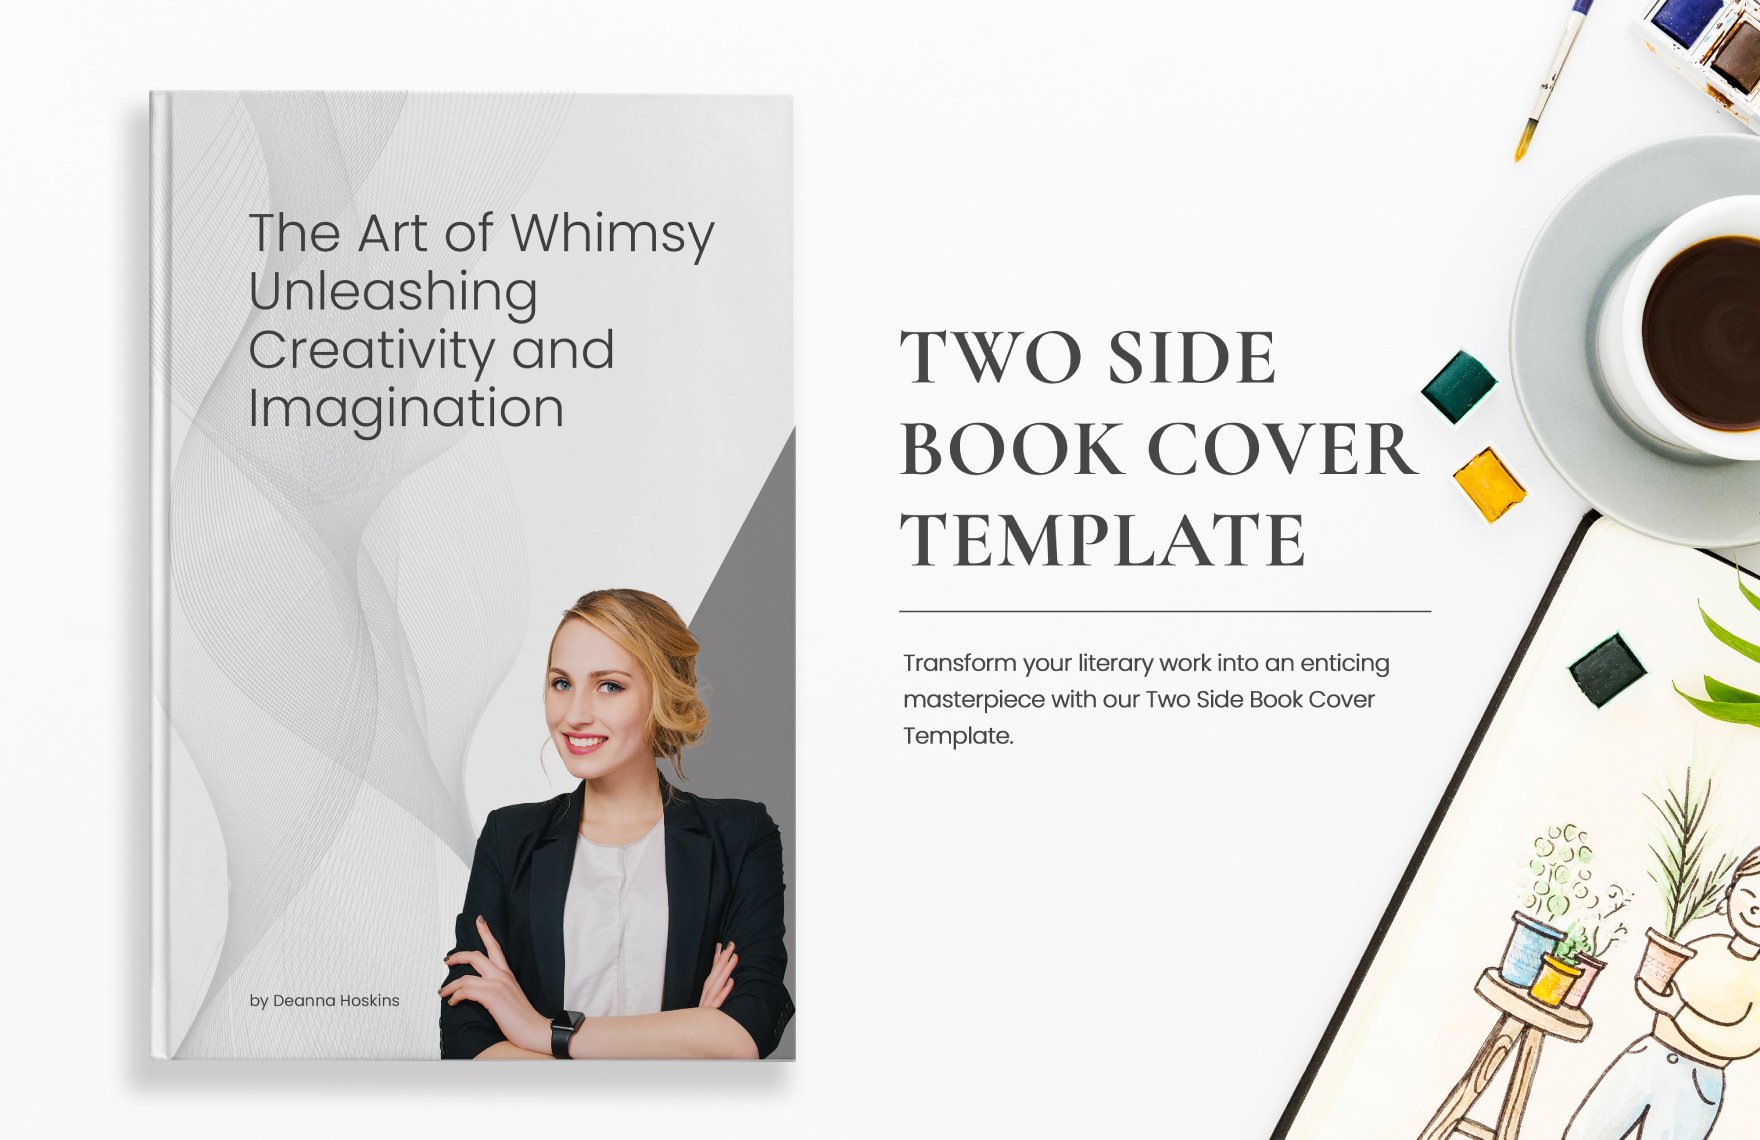 Two Side Book Cover Template